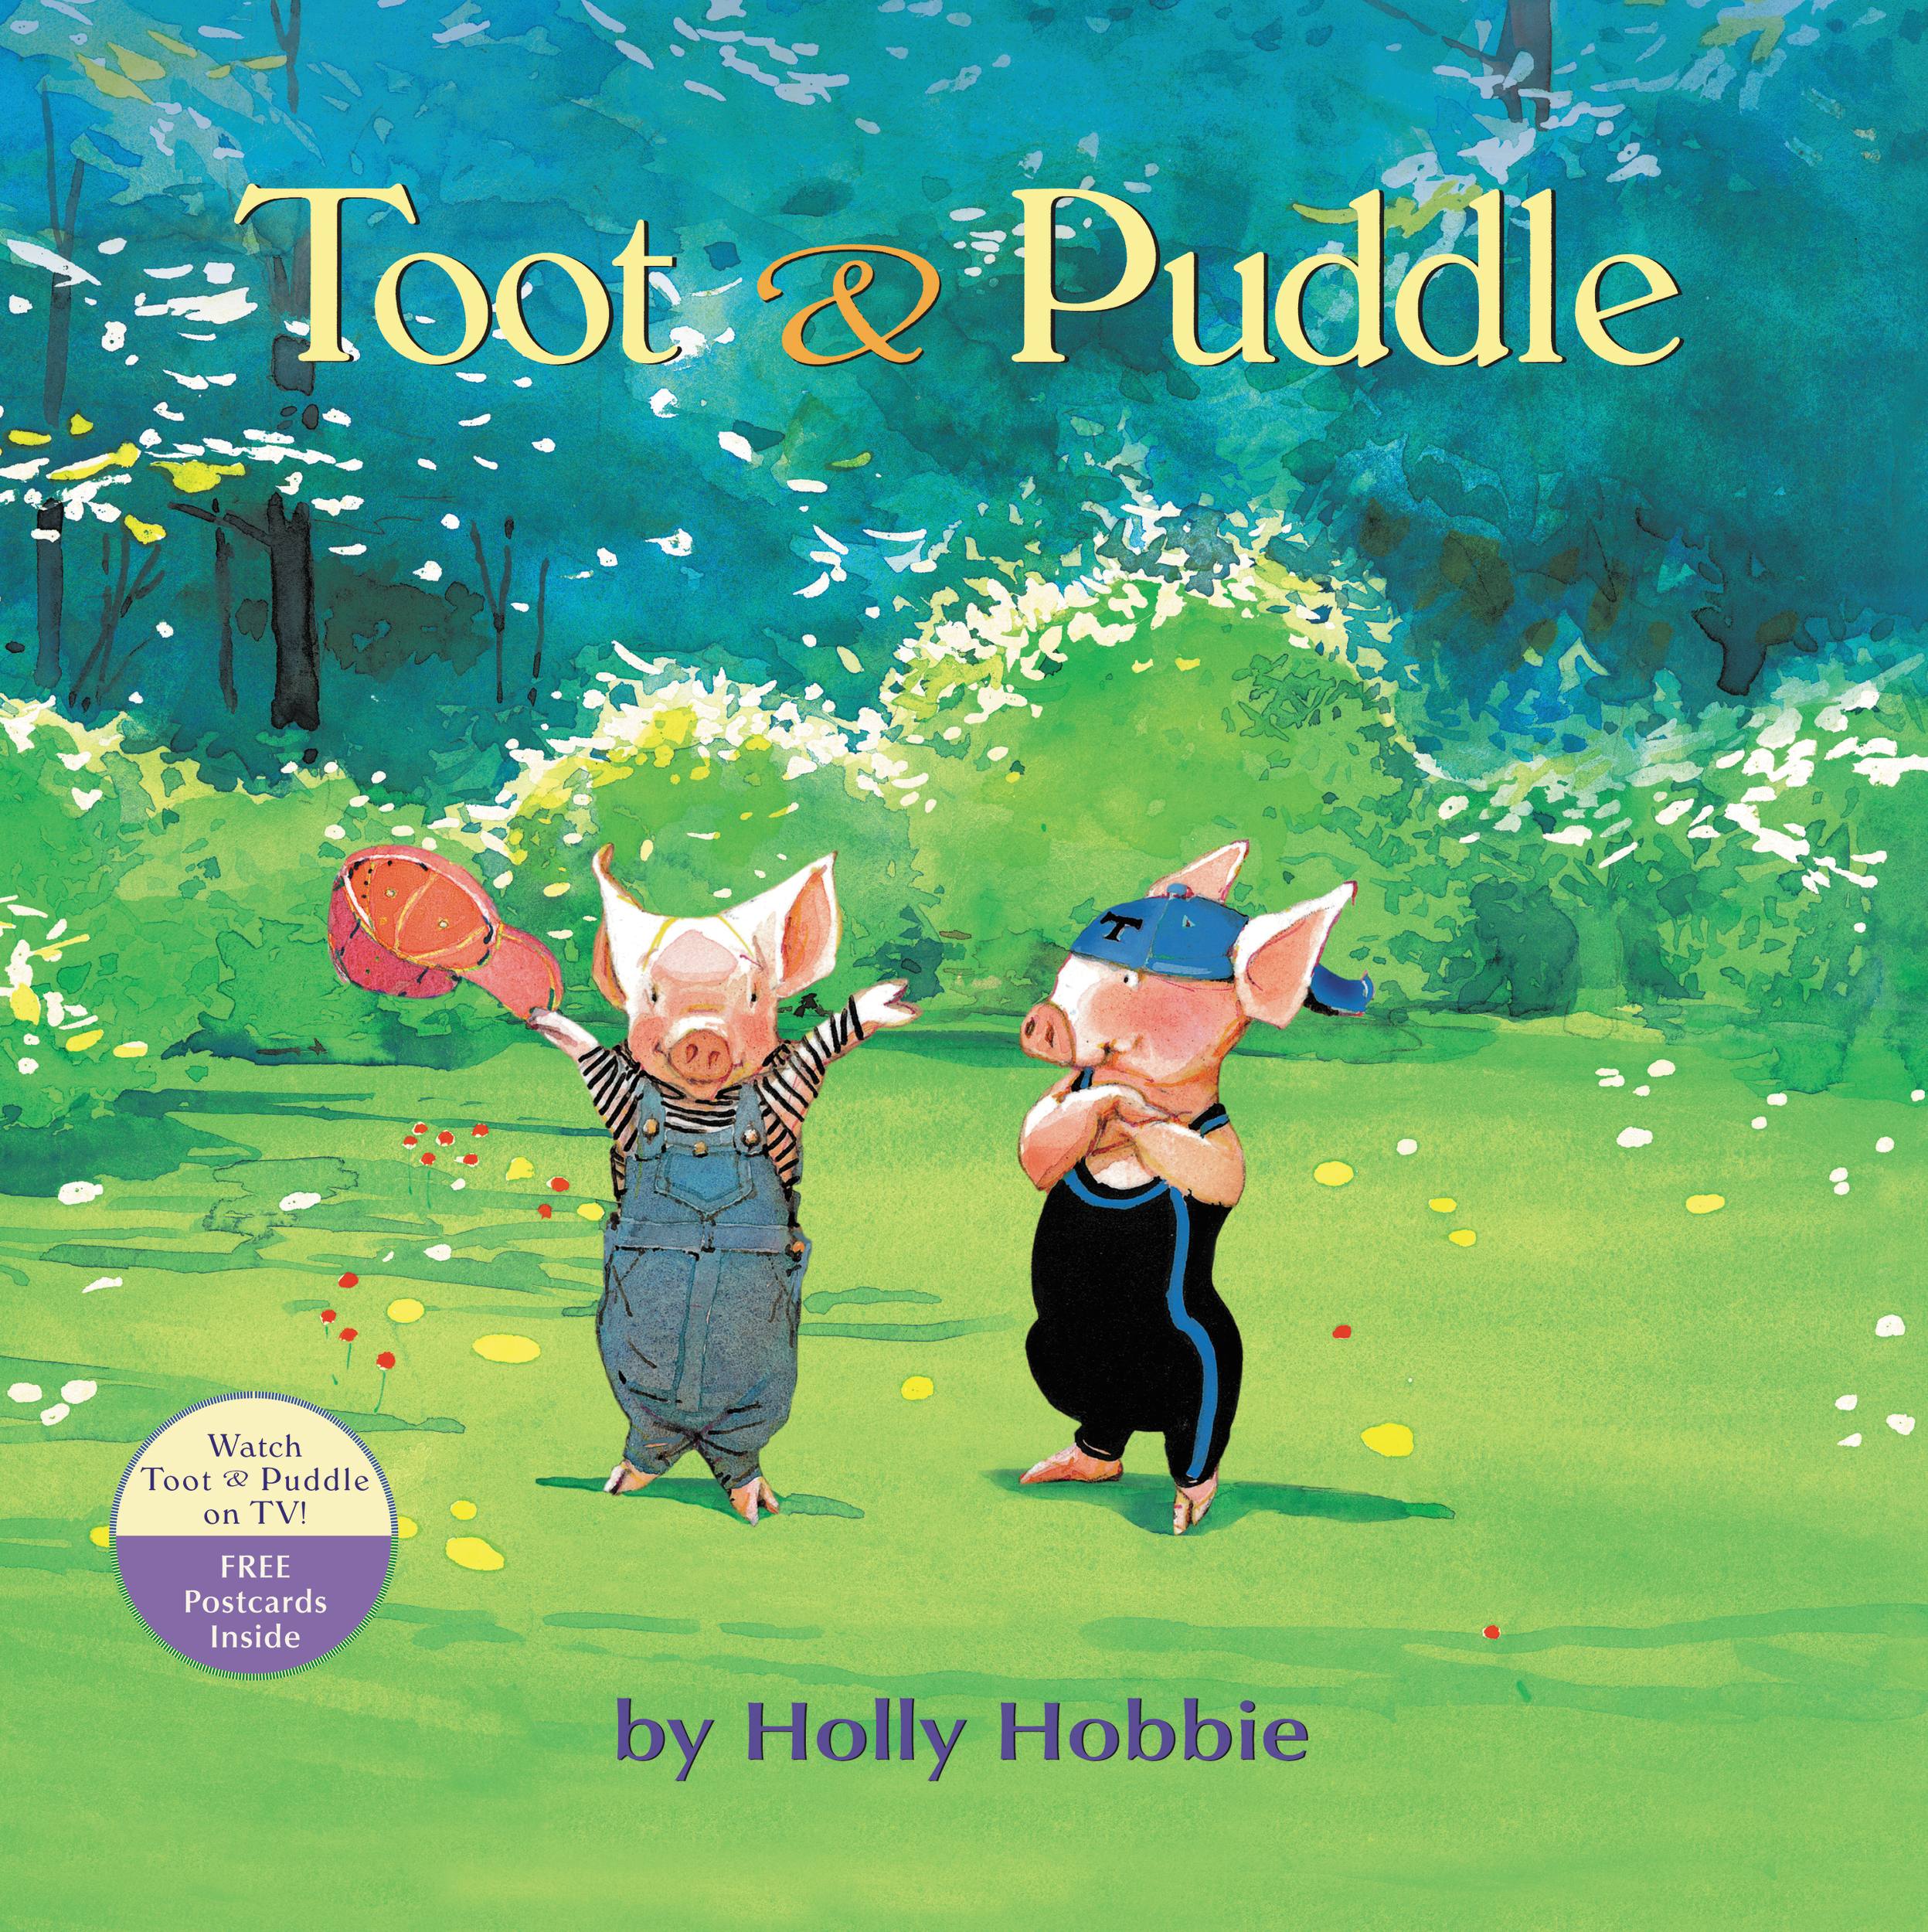 Toot & Puddle by Holly Hobbie